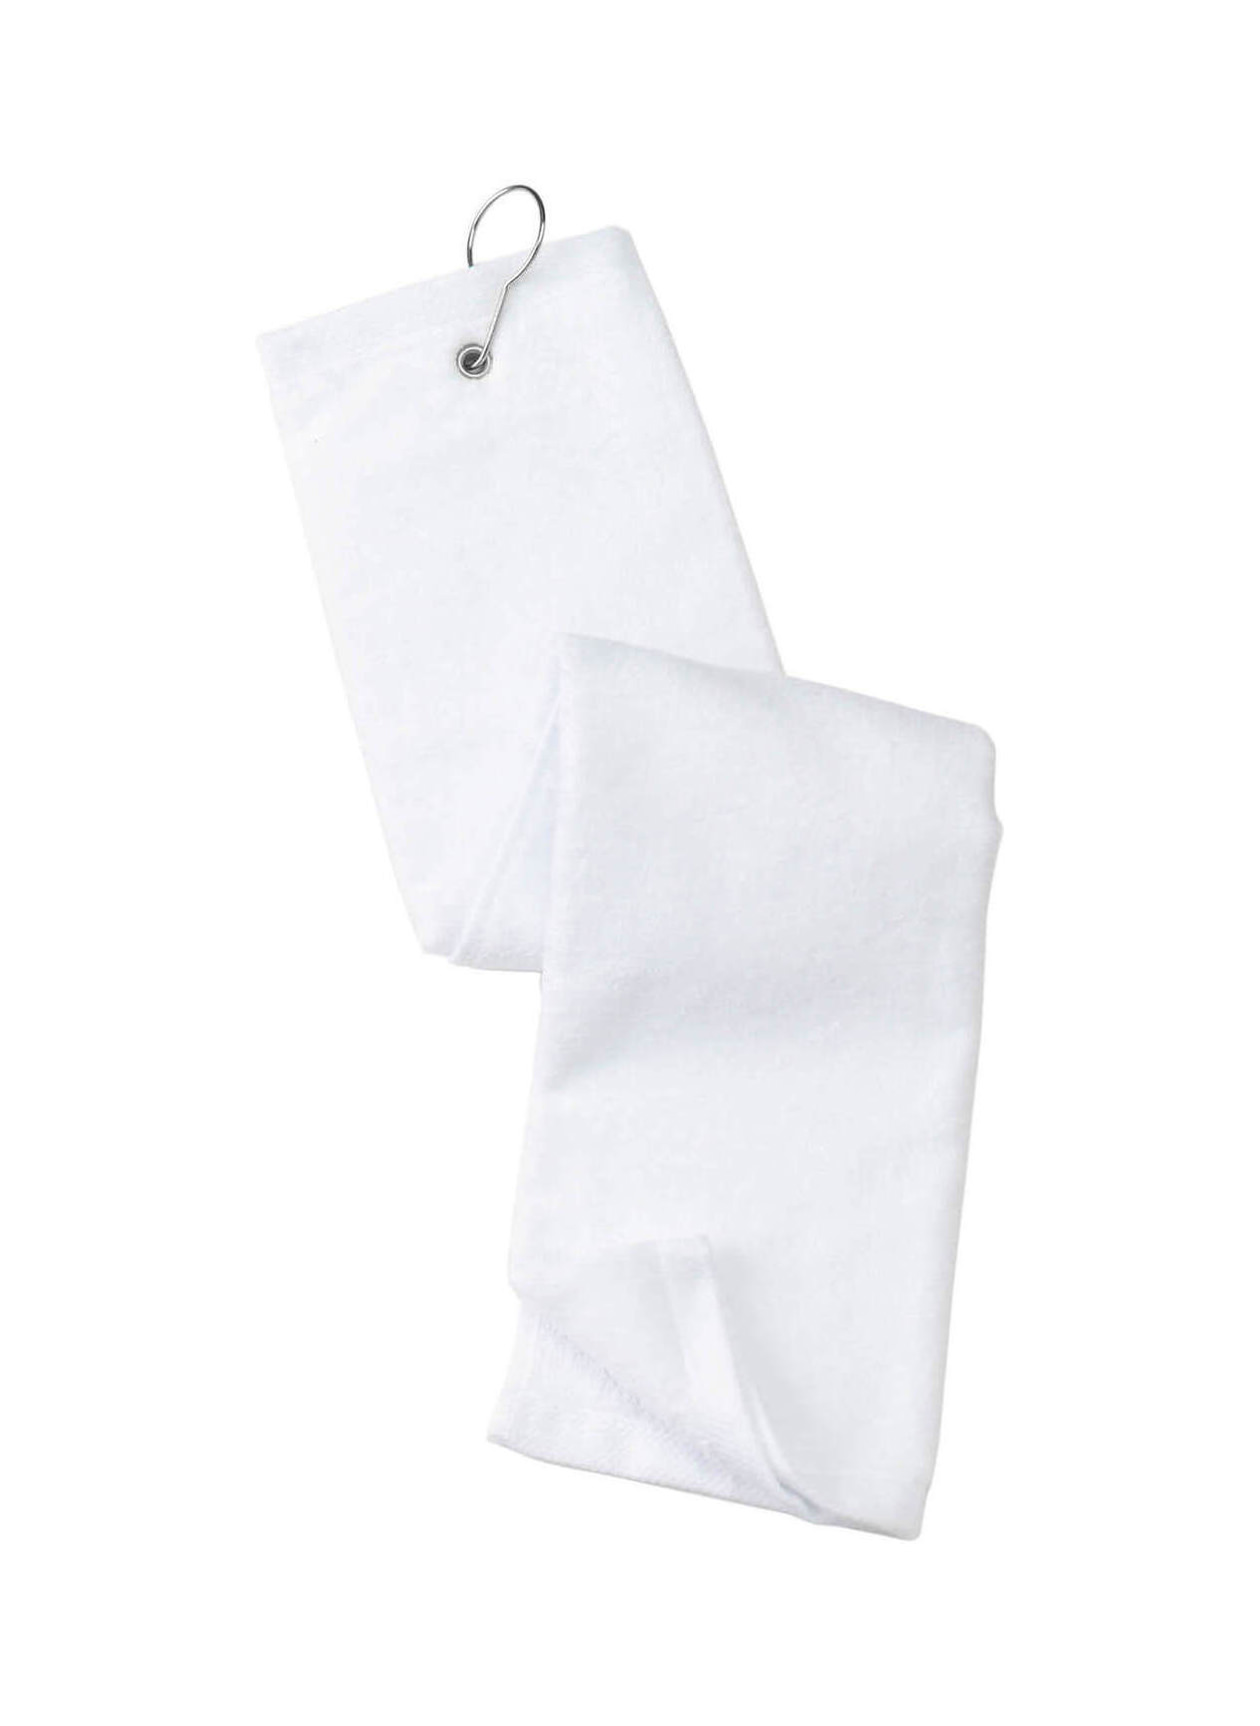 Port Authority White Grommeted Tri-Fold Golf Towel